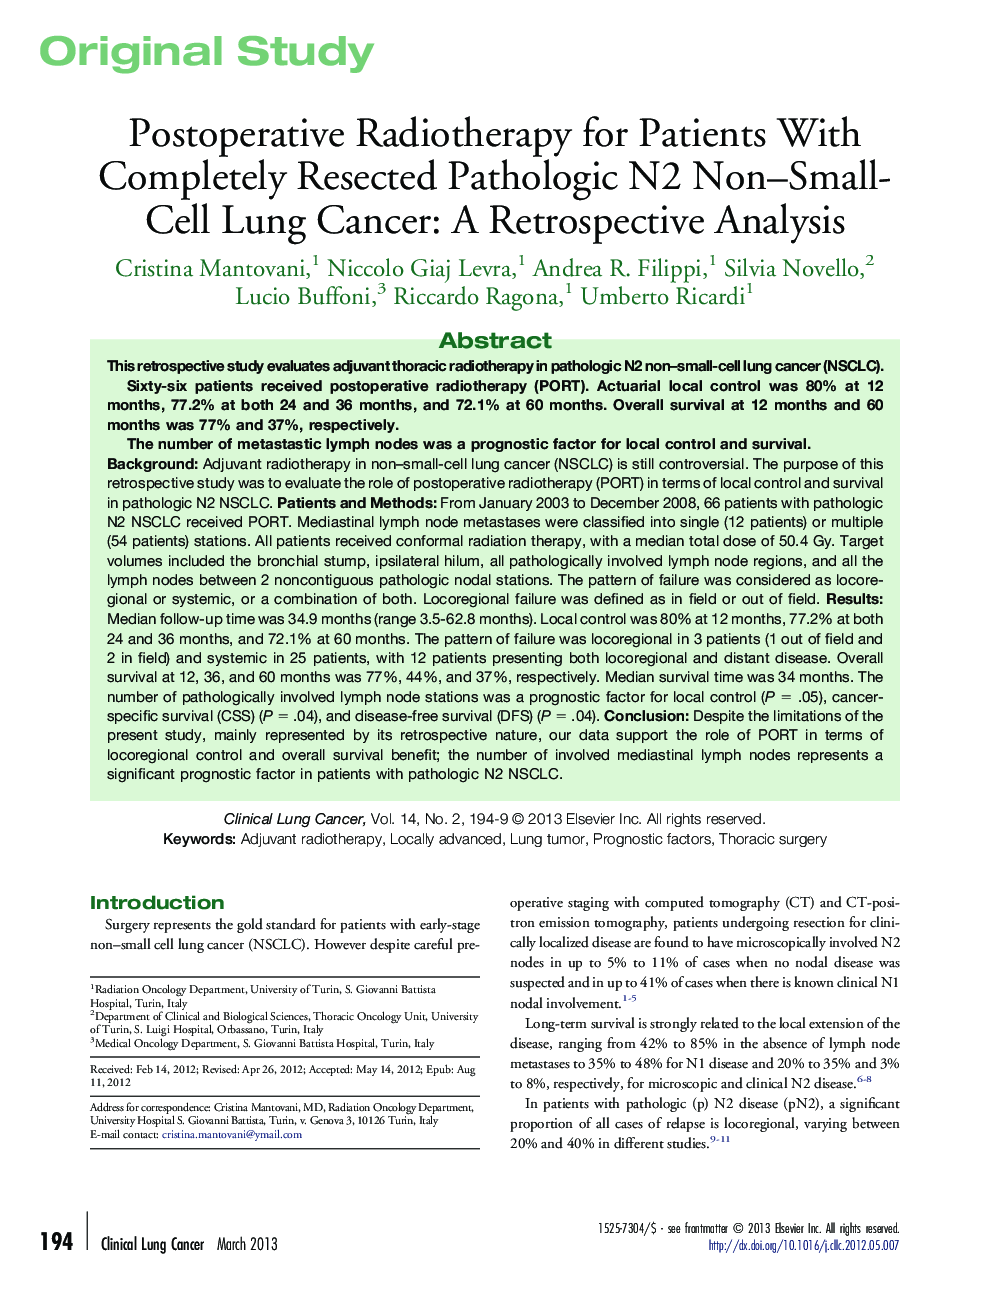 Postoperative Radiotherapy for Patients With Completely Resected Pathologic N2 Non–Small-Cell Lung Cancer: A Retrospective Analysis